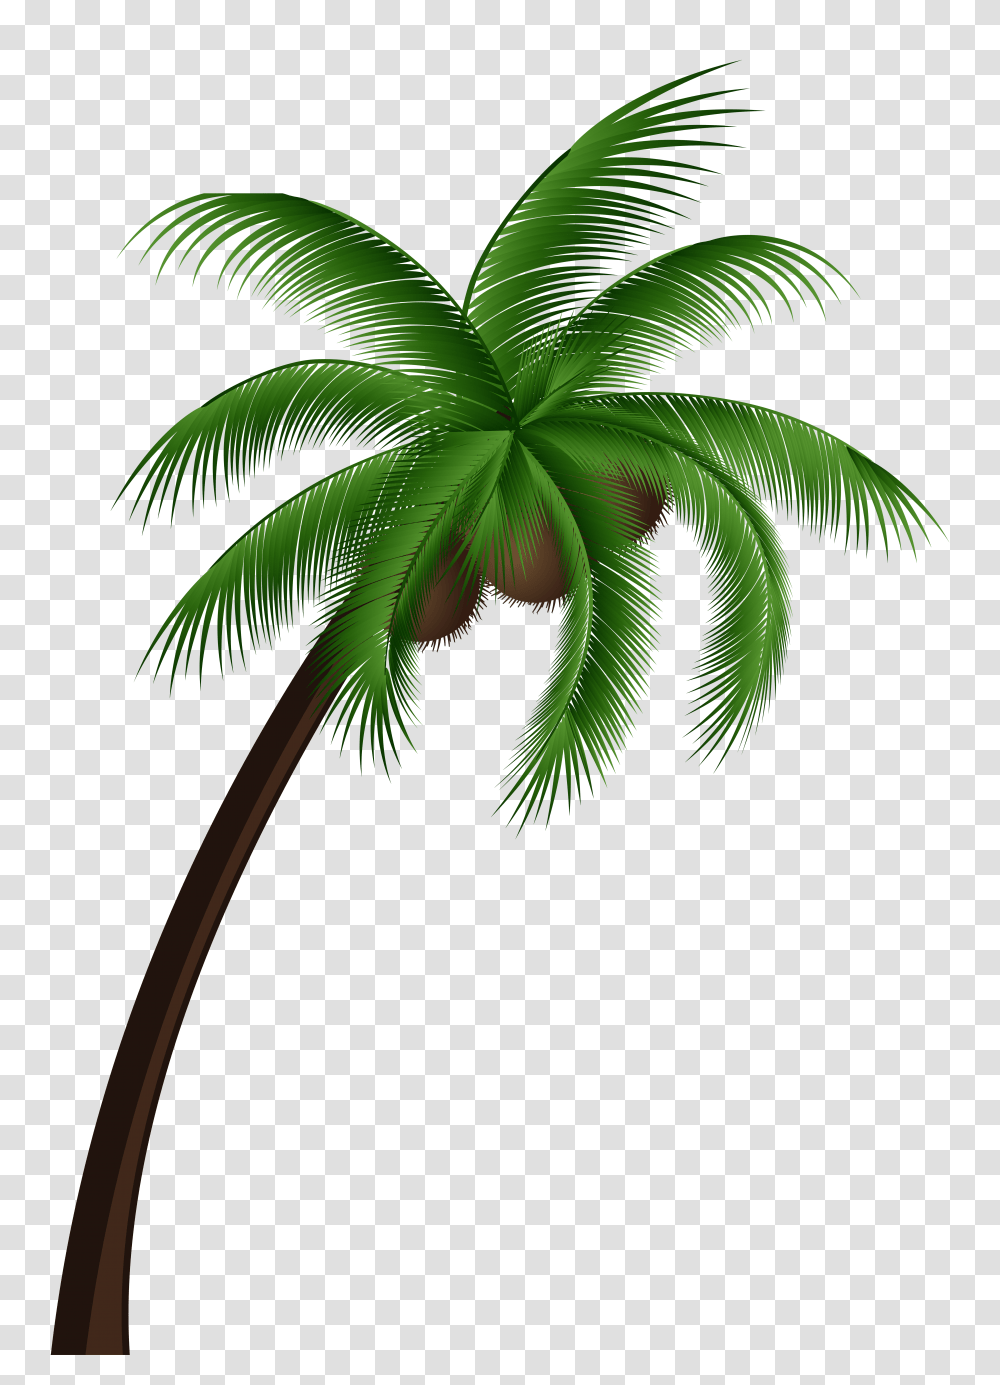 Coconut Tree Vector Coconut Palm Tree Transparent Png